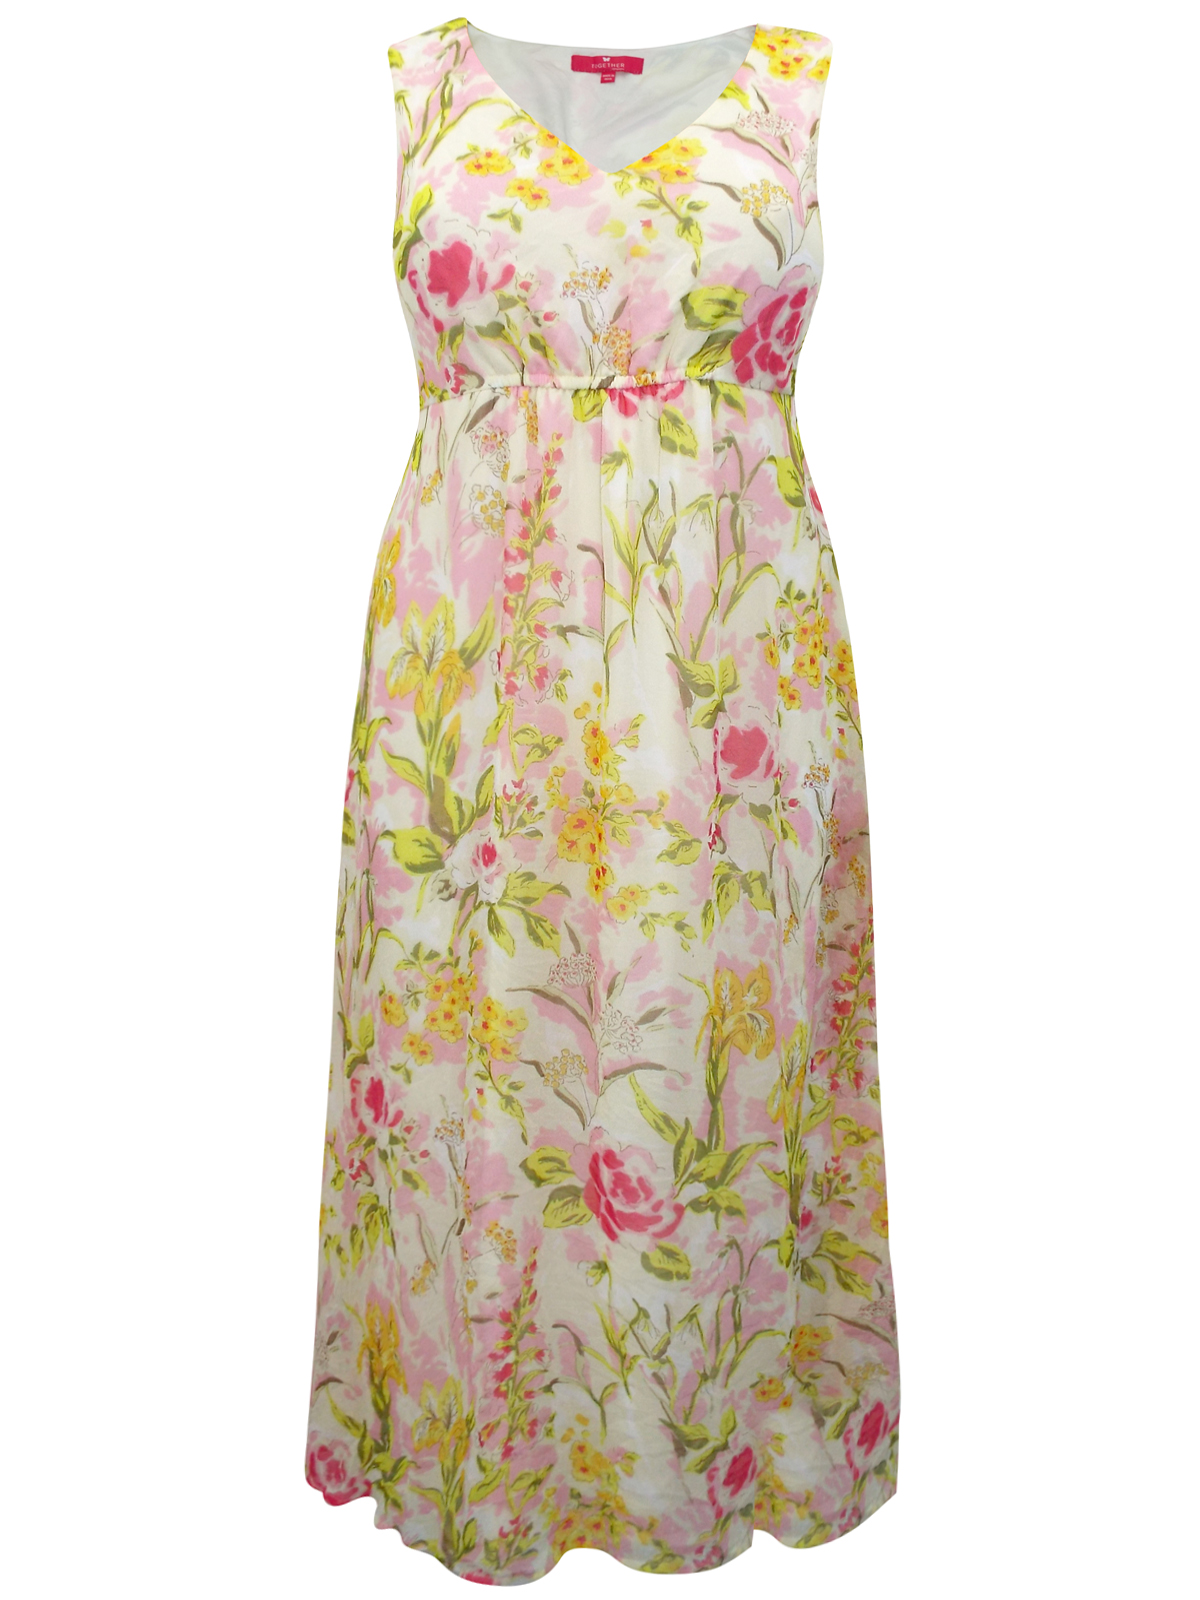 Together YELLOW Floral Print Maxi Dress - Plus Size 16 to 22